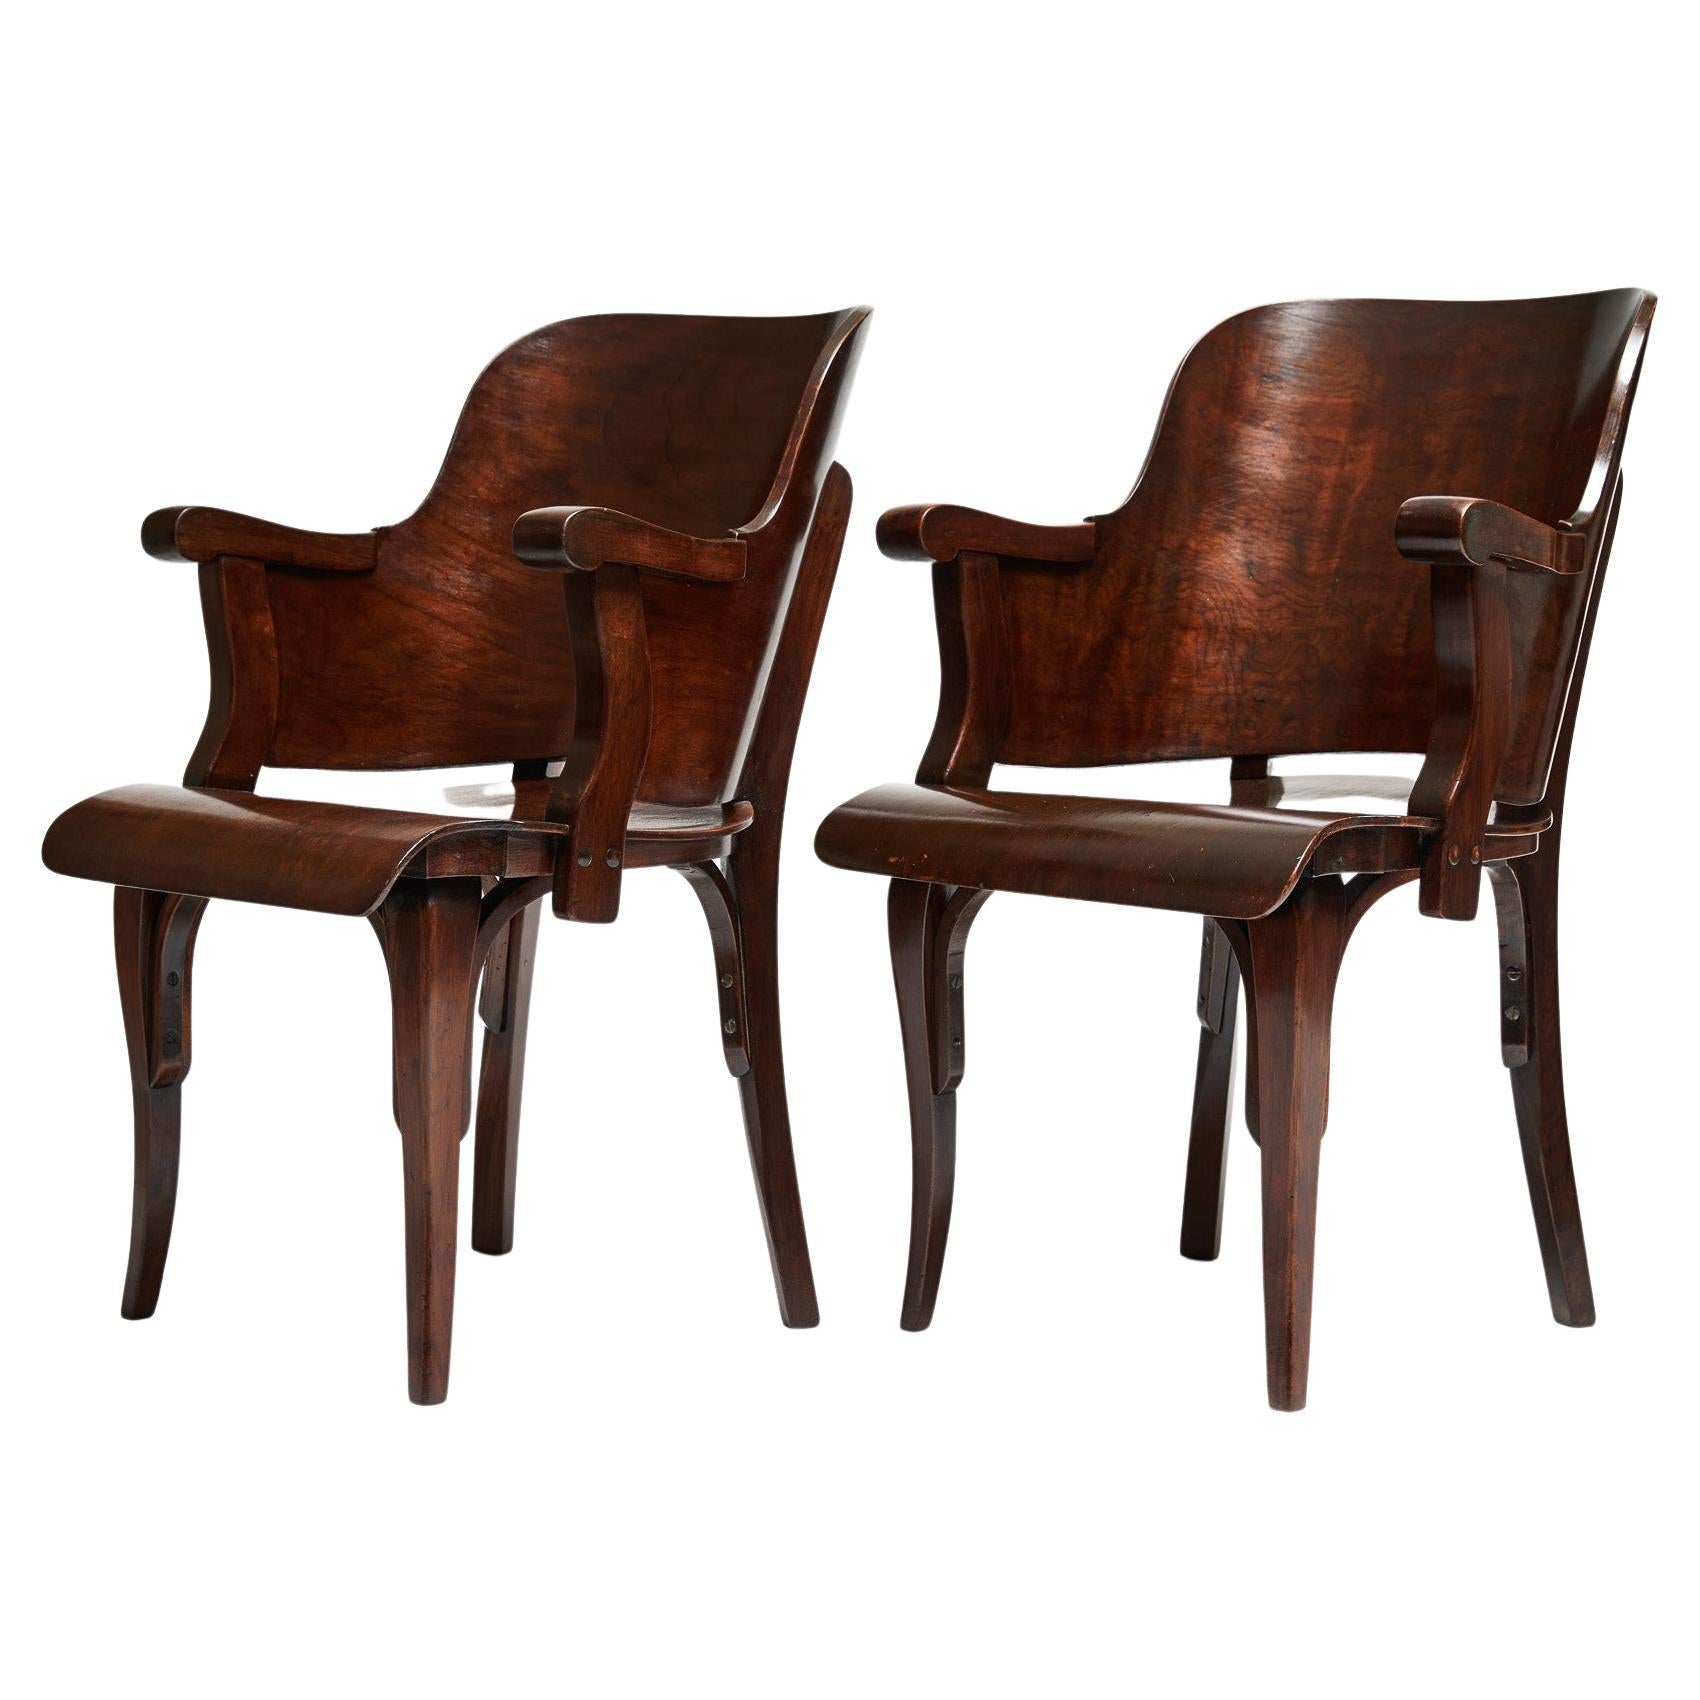 Available today, this Brazilian Modern Accent Armchairs in Bentwood by Cimo are stunning and adorable!

The curved shapes that provided a differential in style were only possible because Cimo imported the steam wood lamination technology from